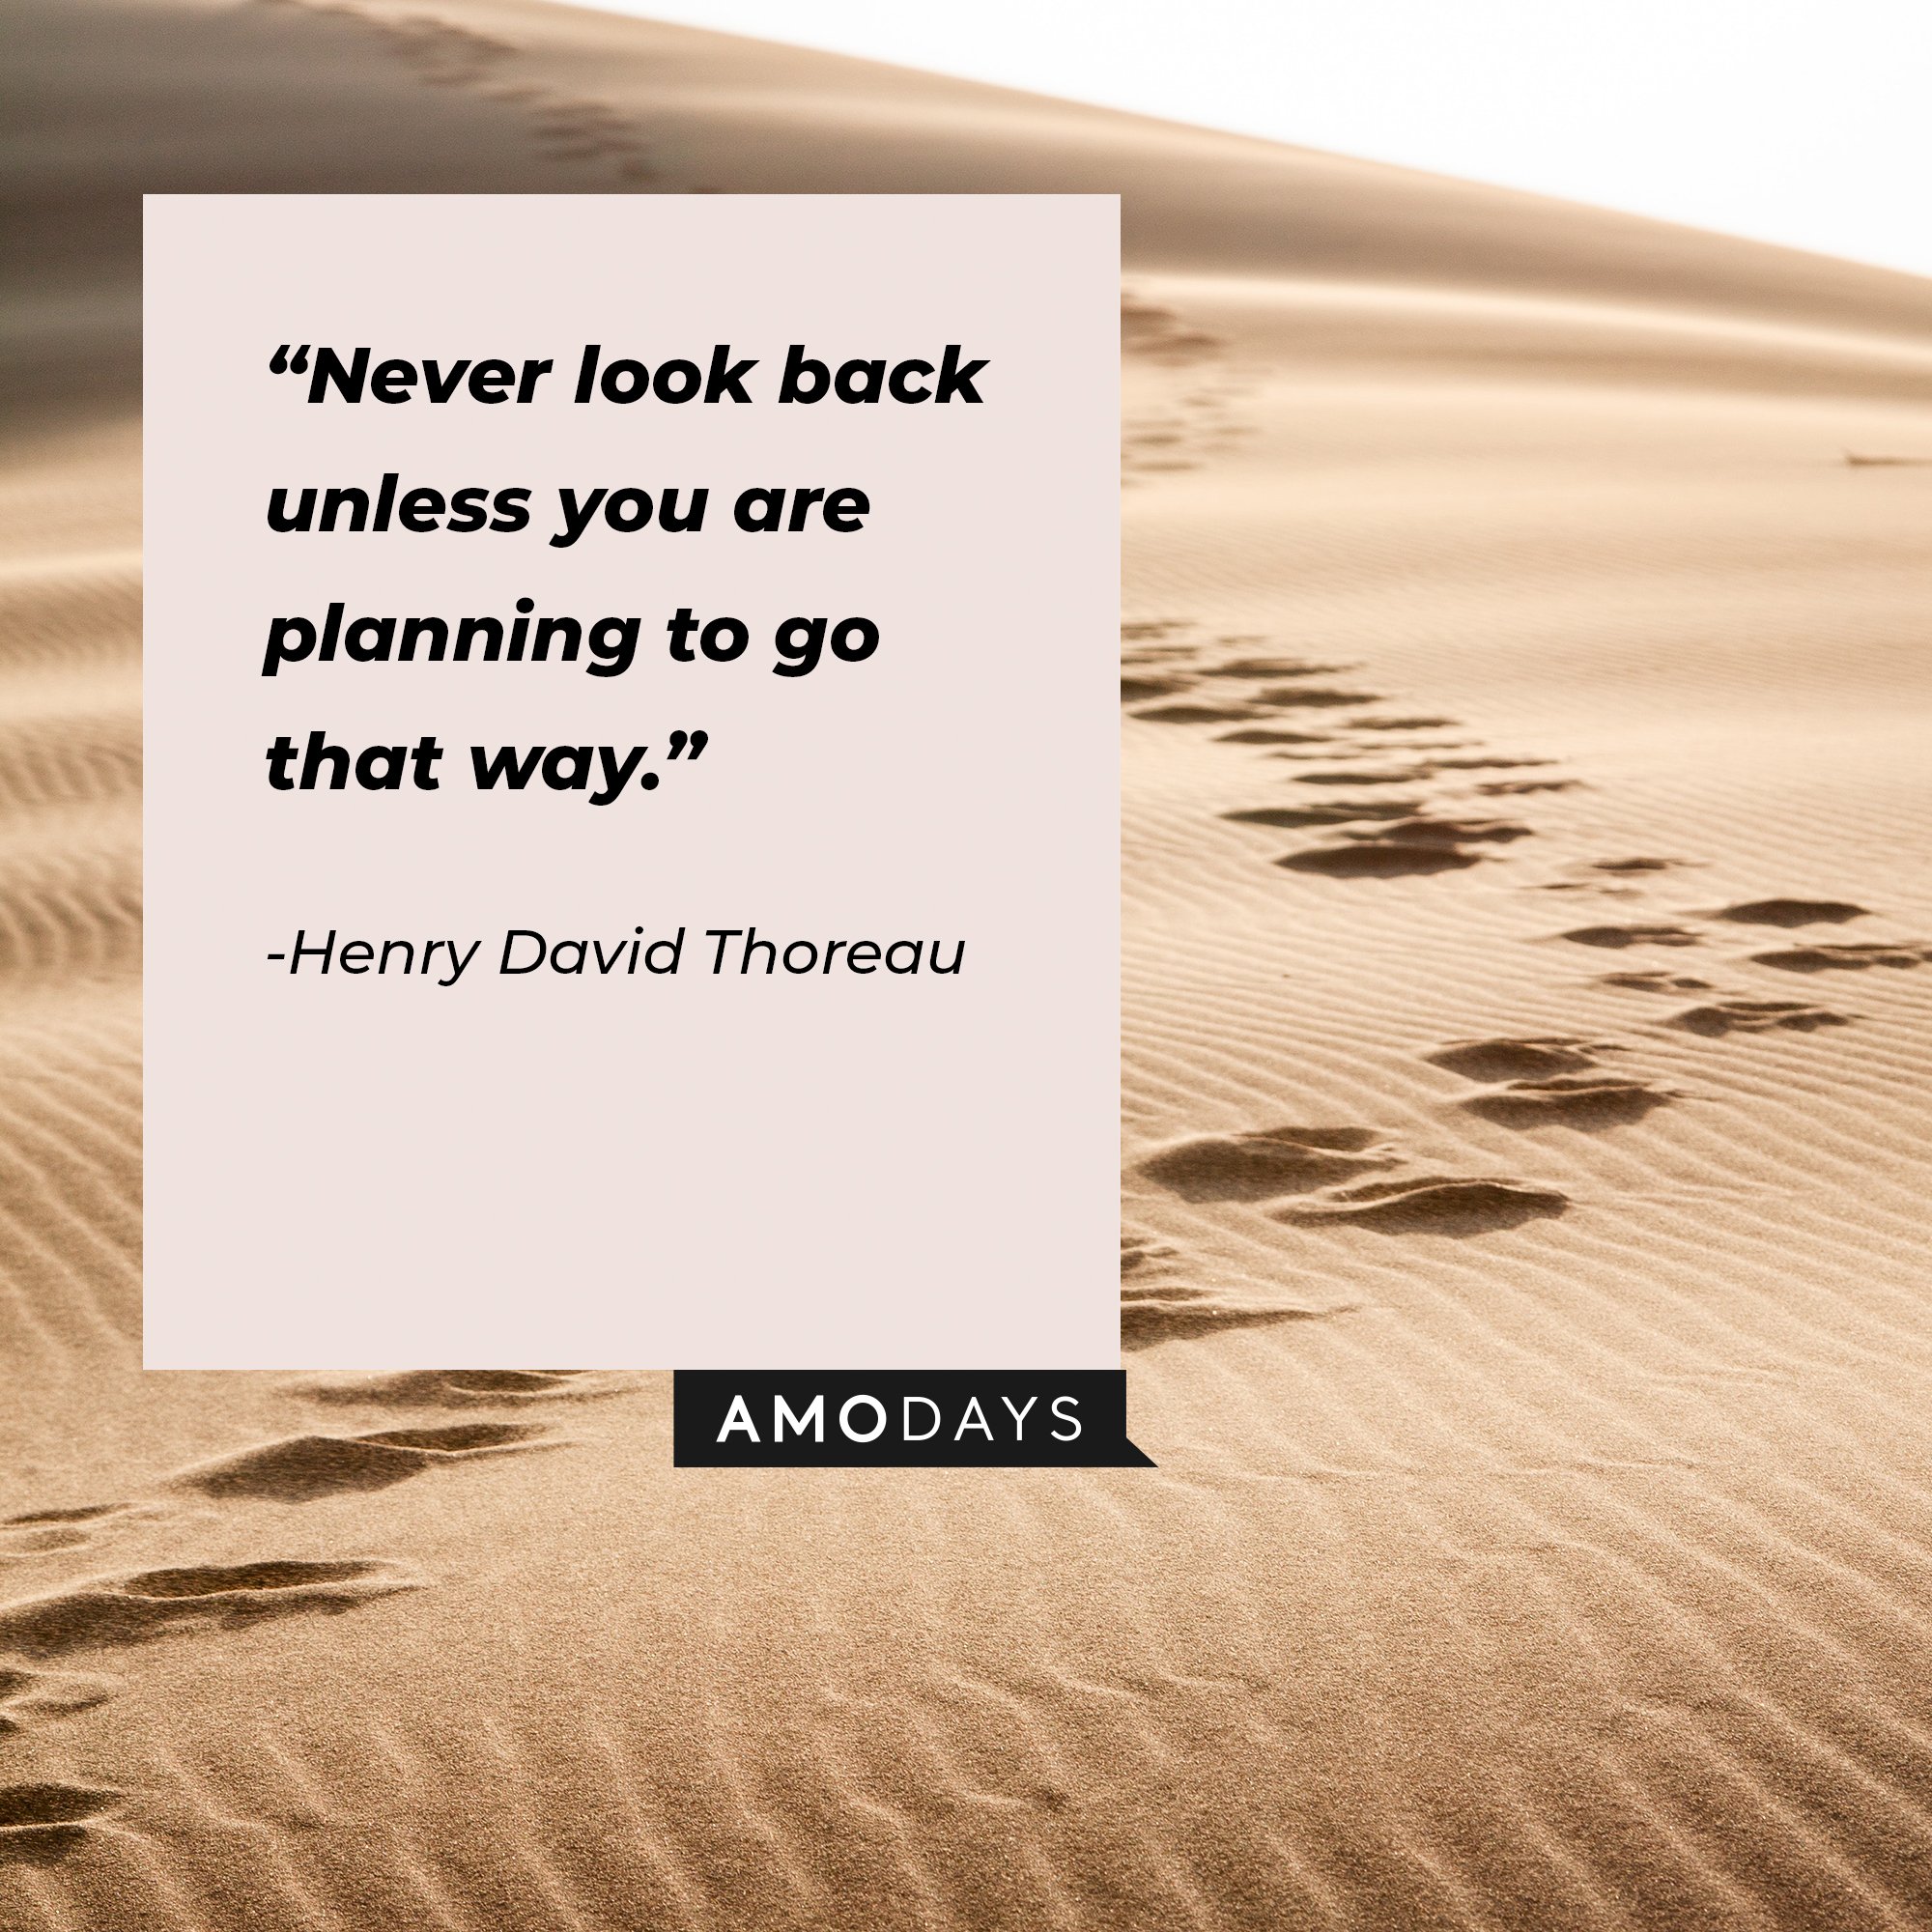 Henry David Thoreau's quote: “Never look back unless you are planning to go that way.”  | Image: AmoDays